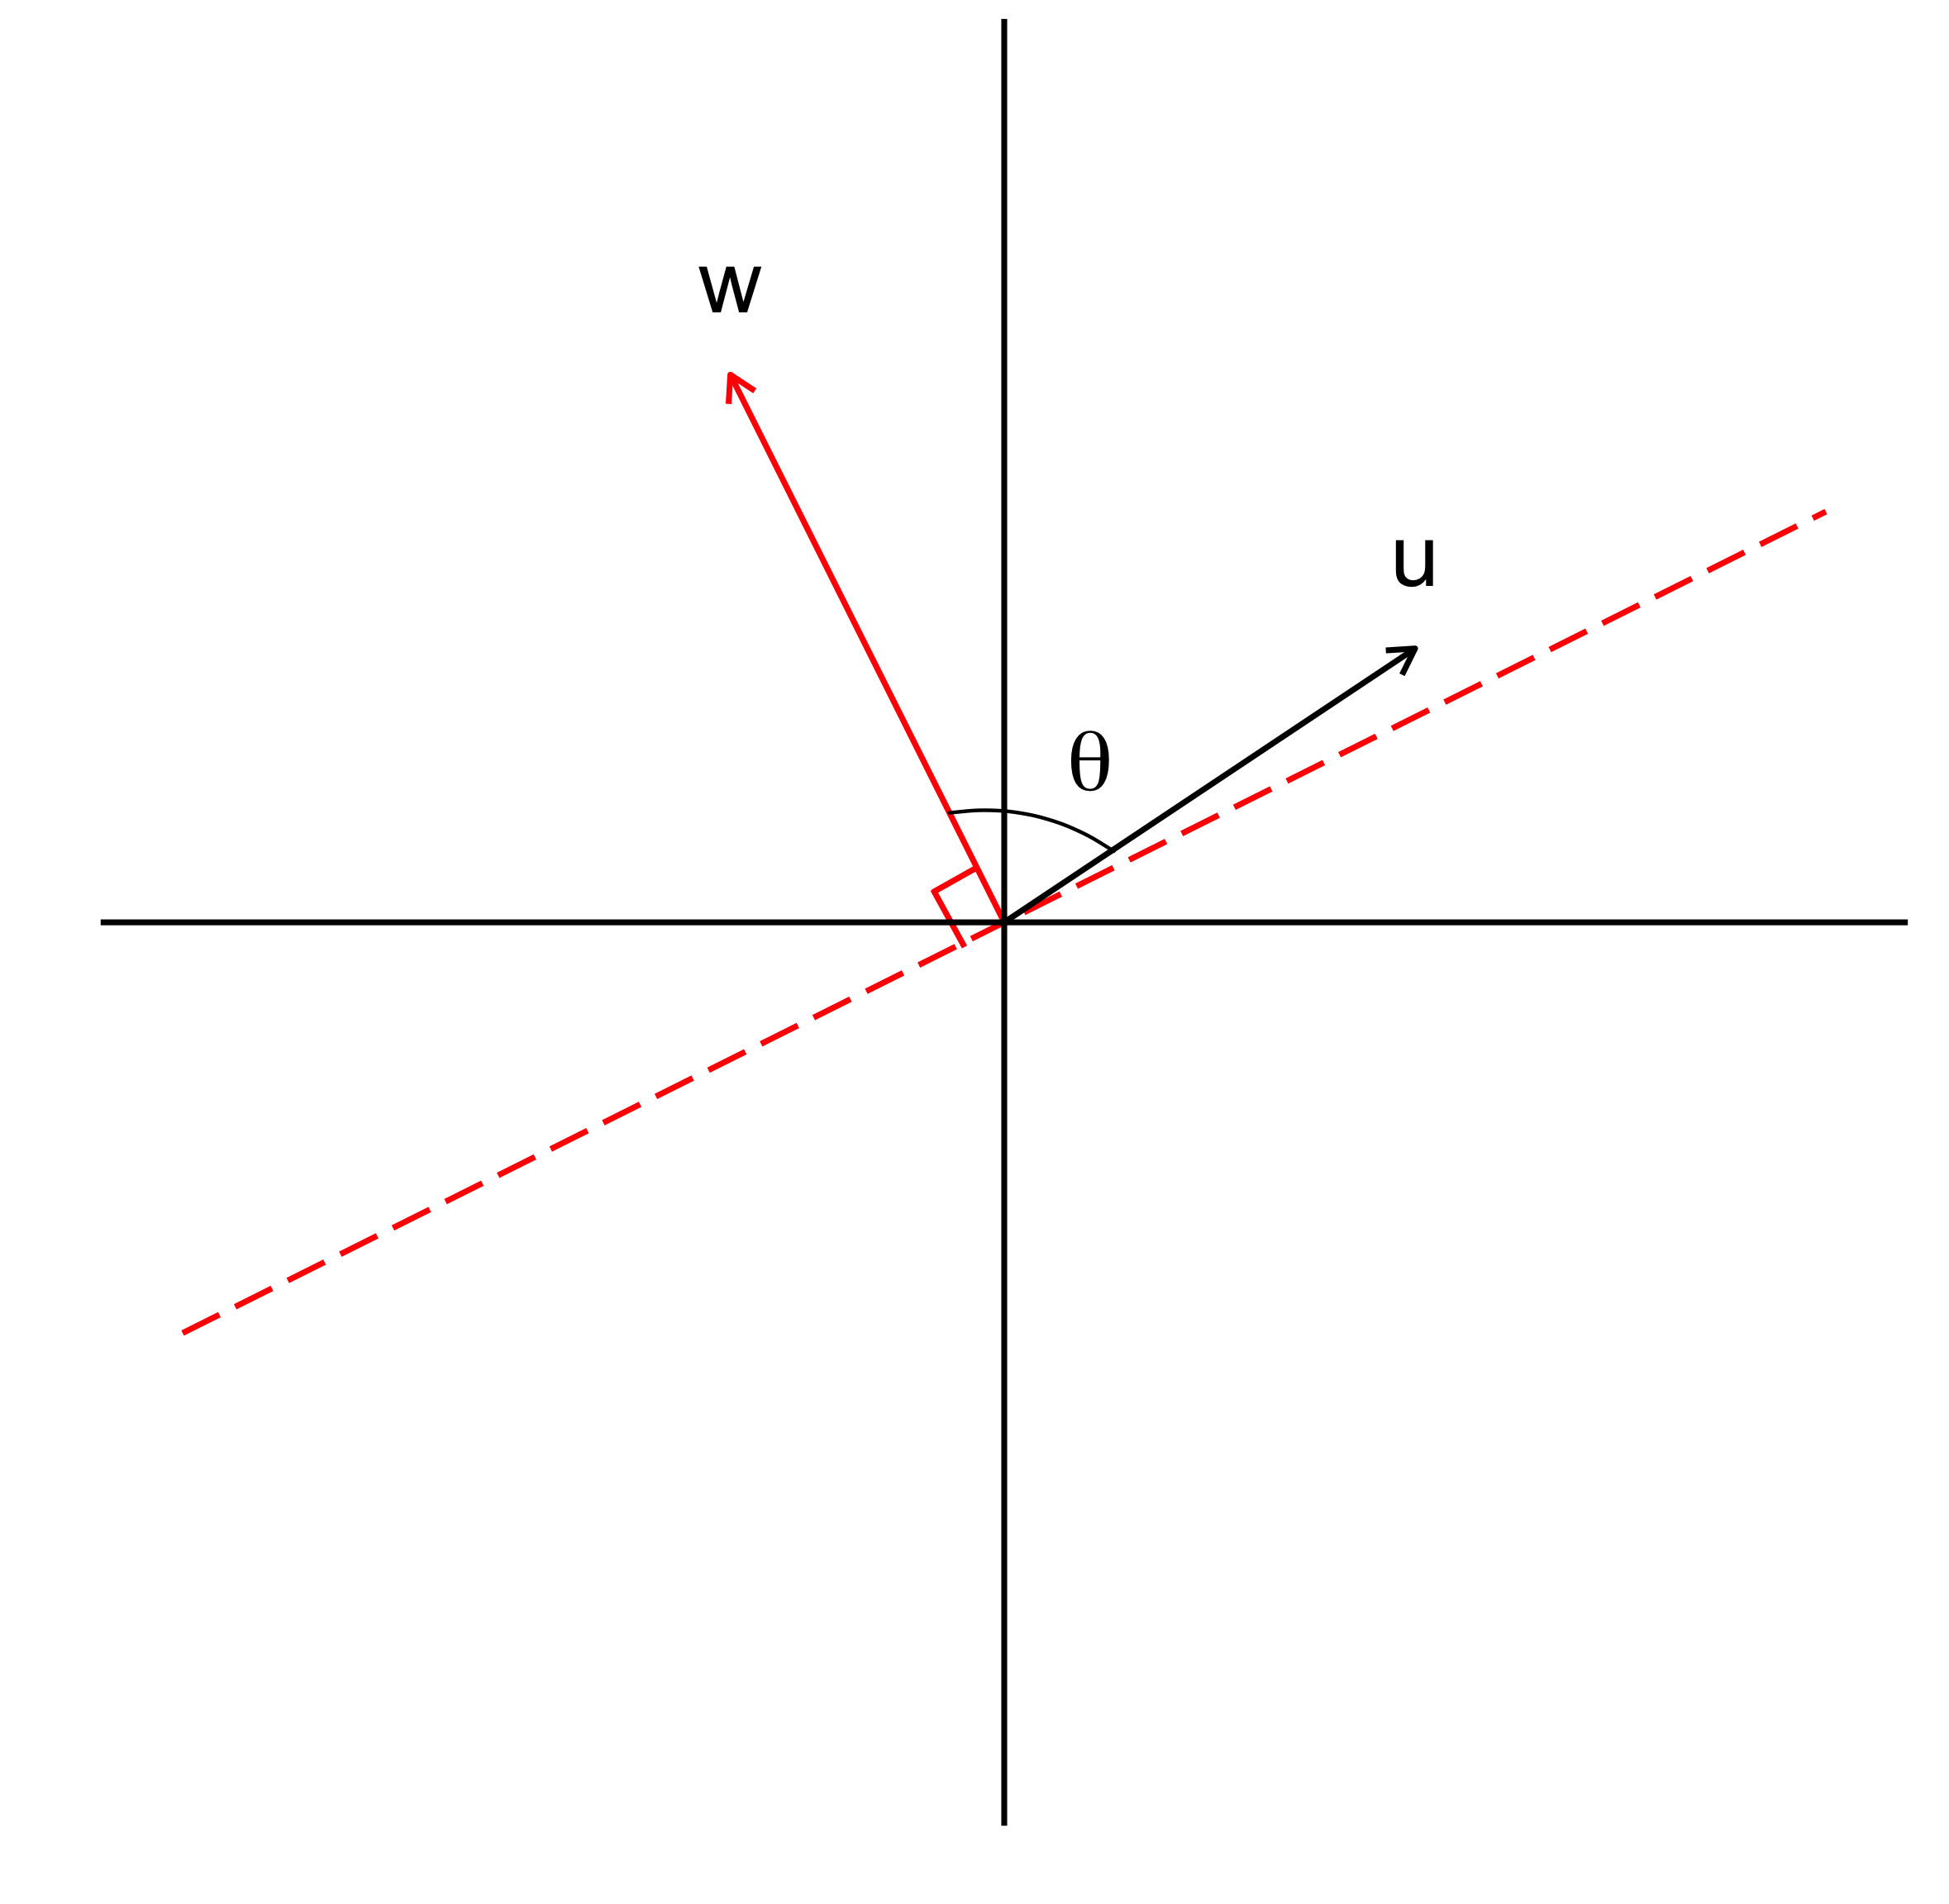 Fig 2. Visualisation of two-half planes divided by the plane $\mathbf{w^Tx = 0}$